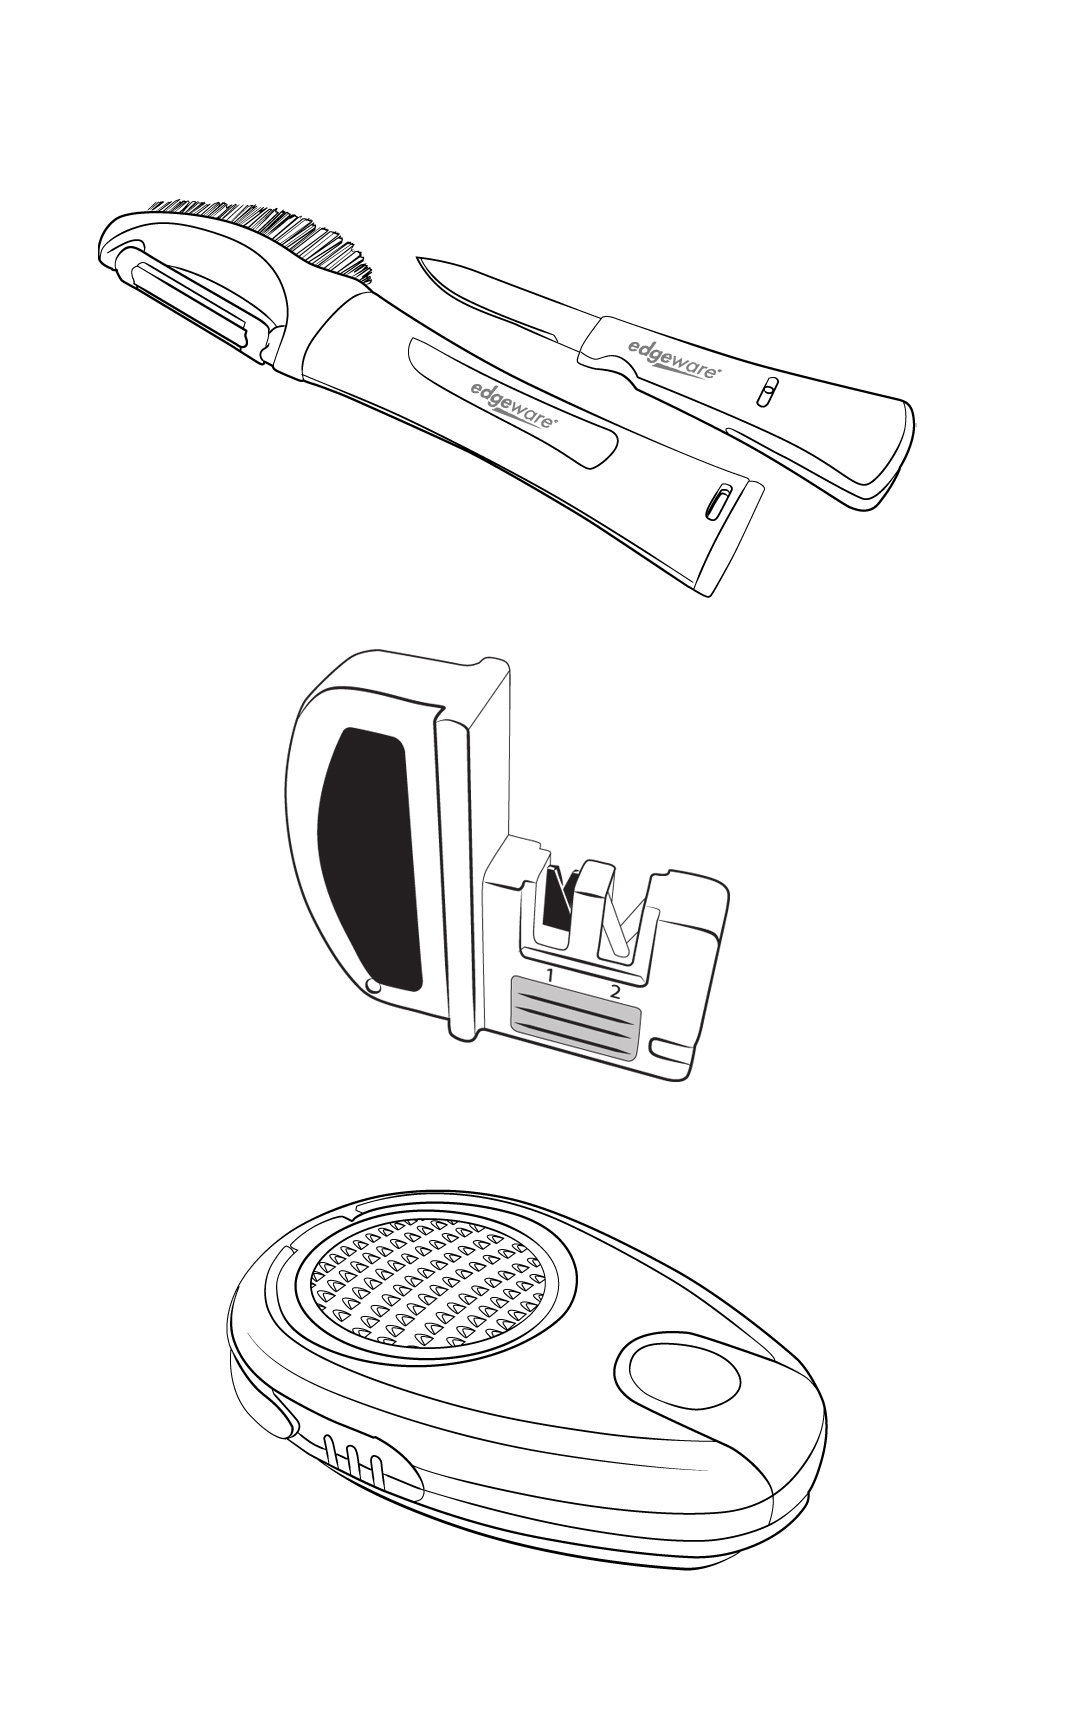 Retail Products Illustrated - Vector Line Drawings